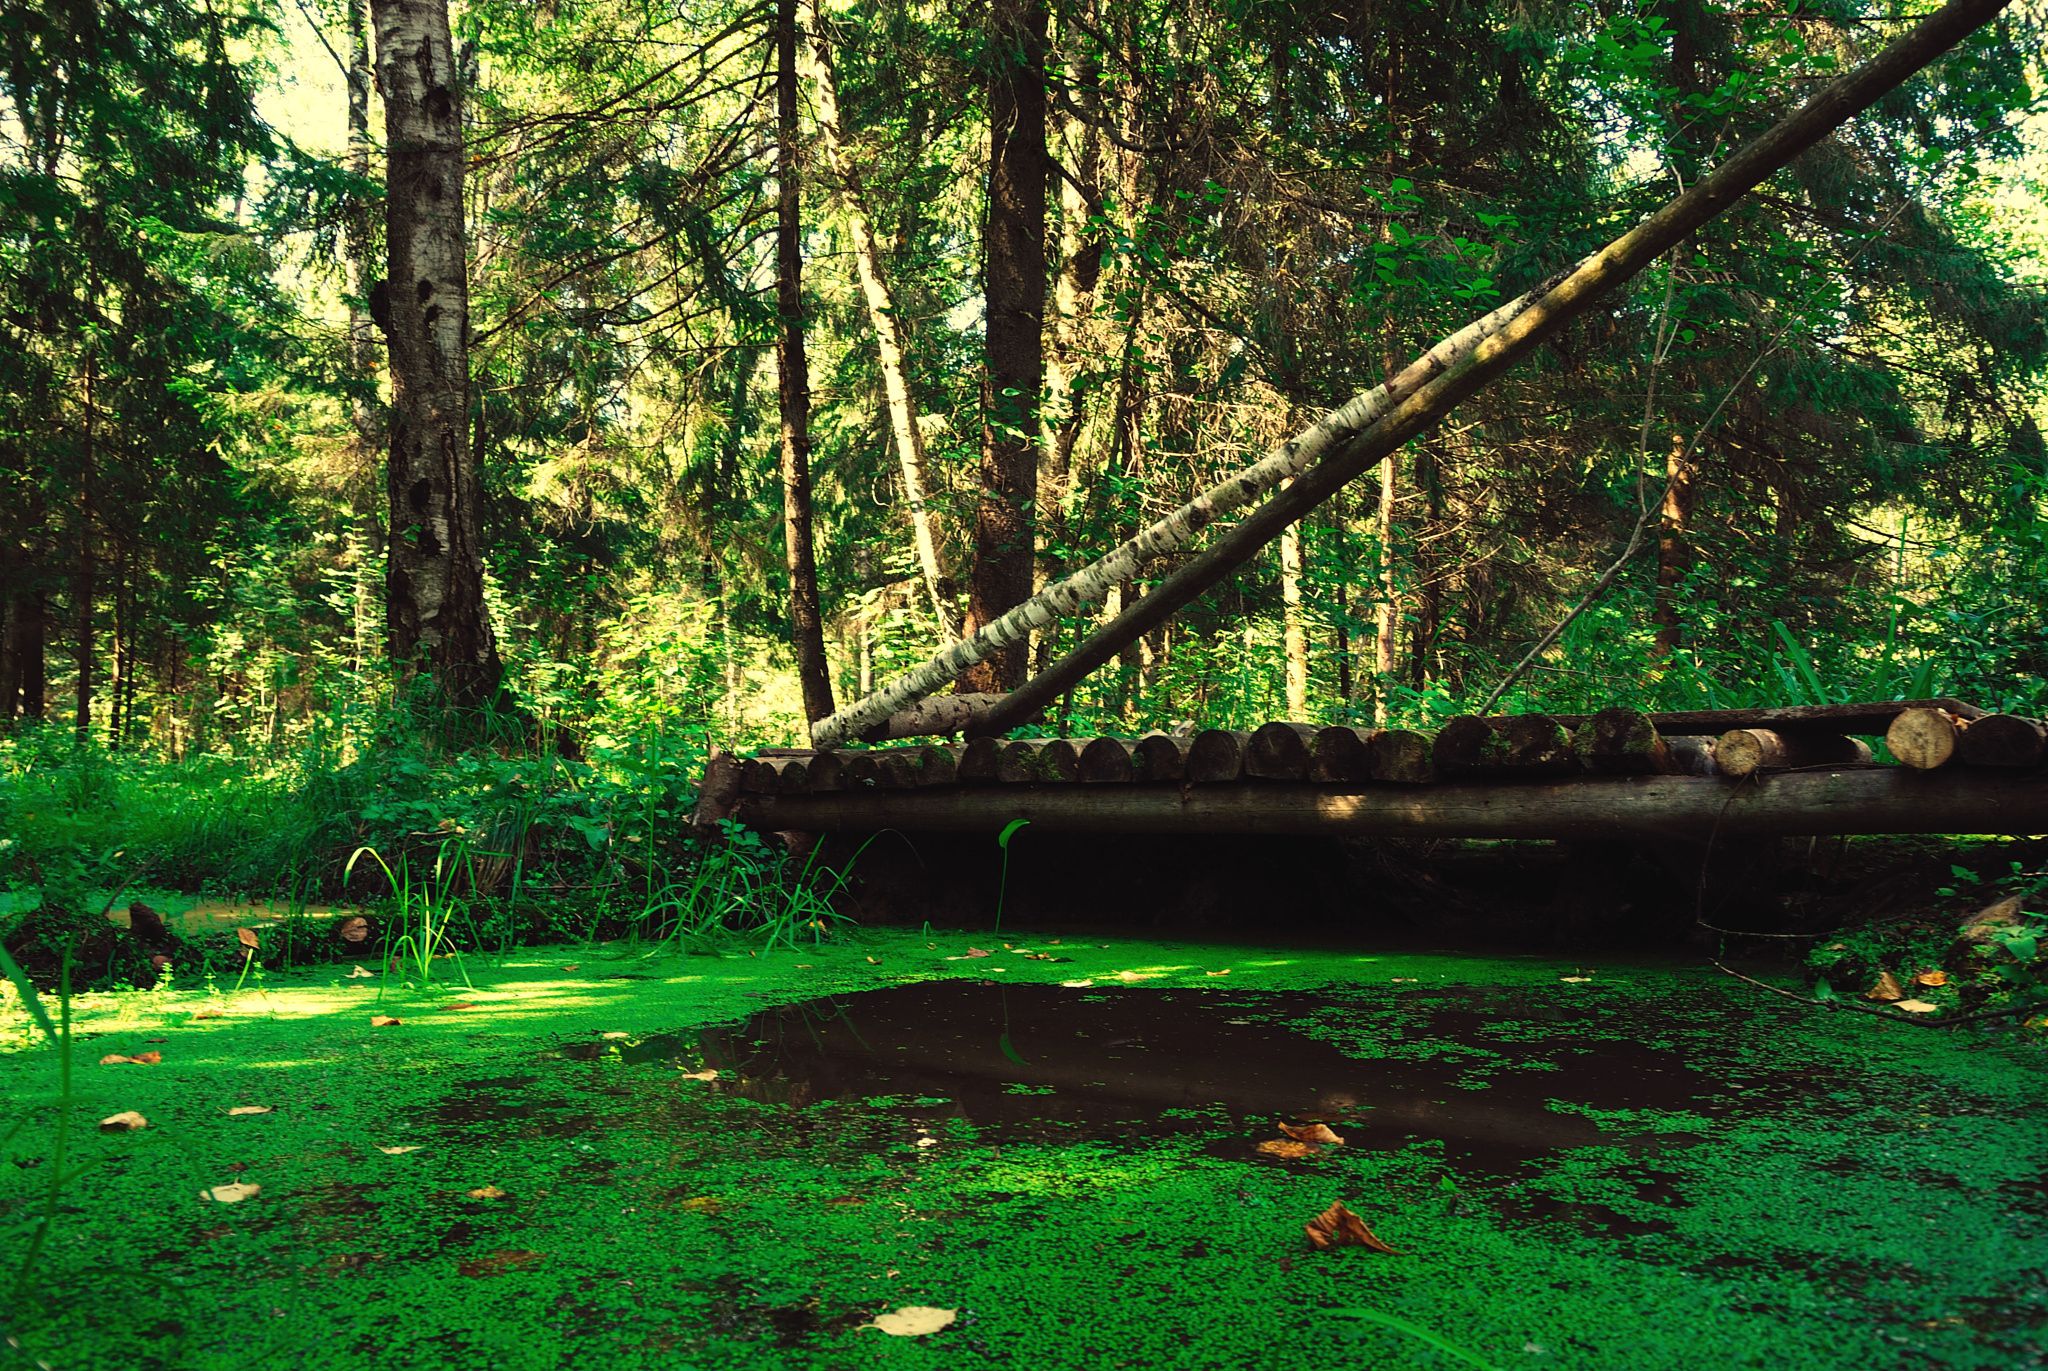 Blooms of duckweed in the forest river - Scenic views of the ...